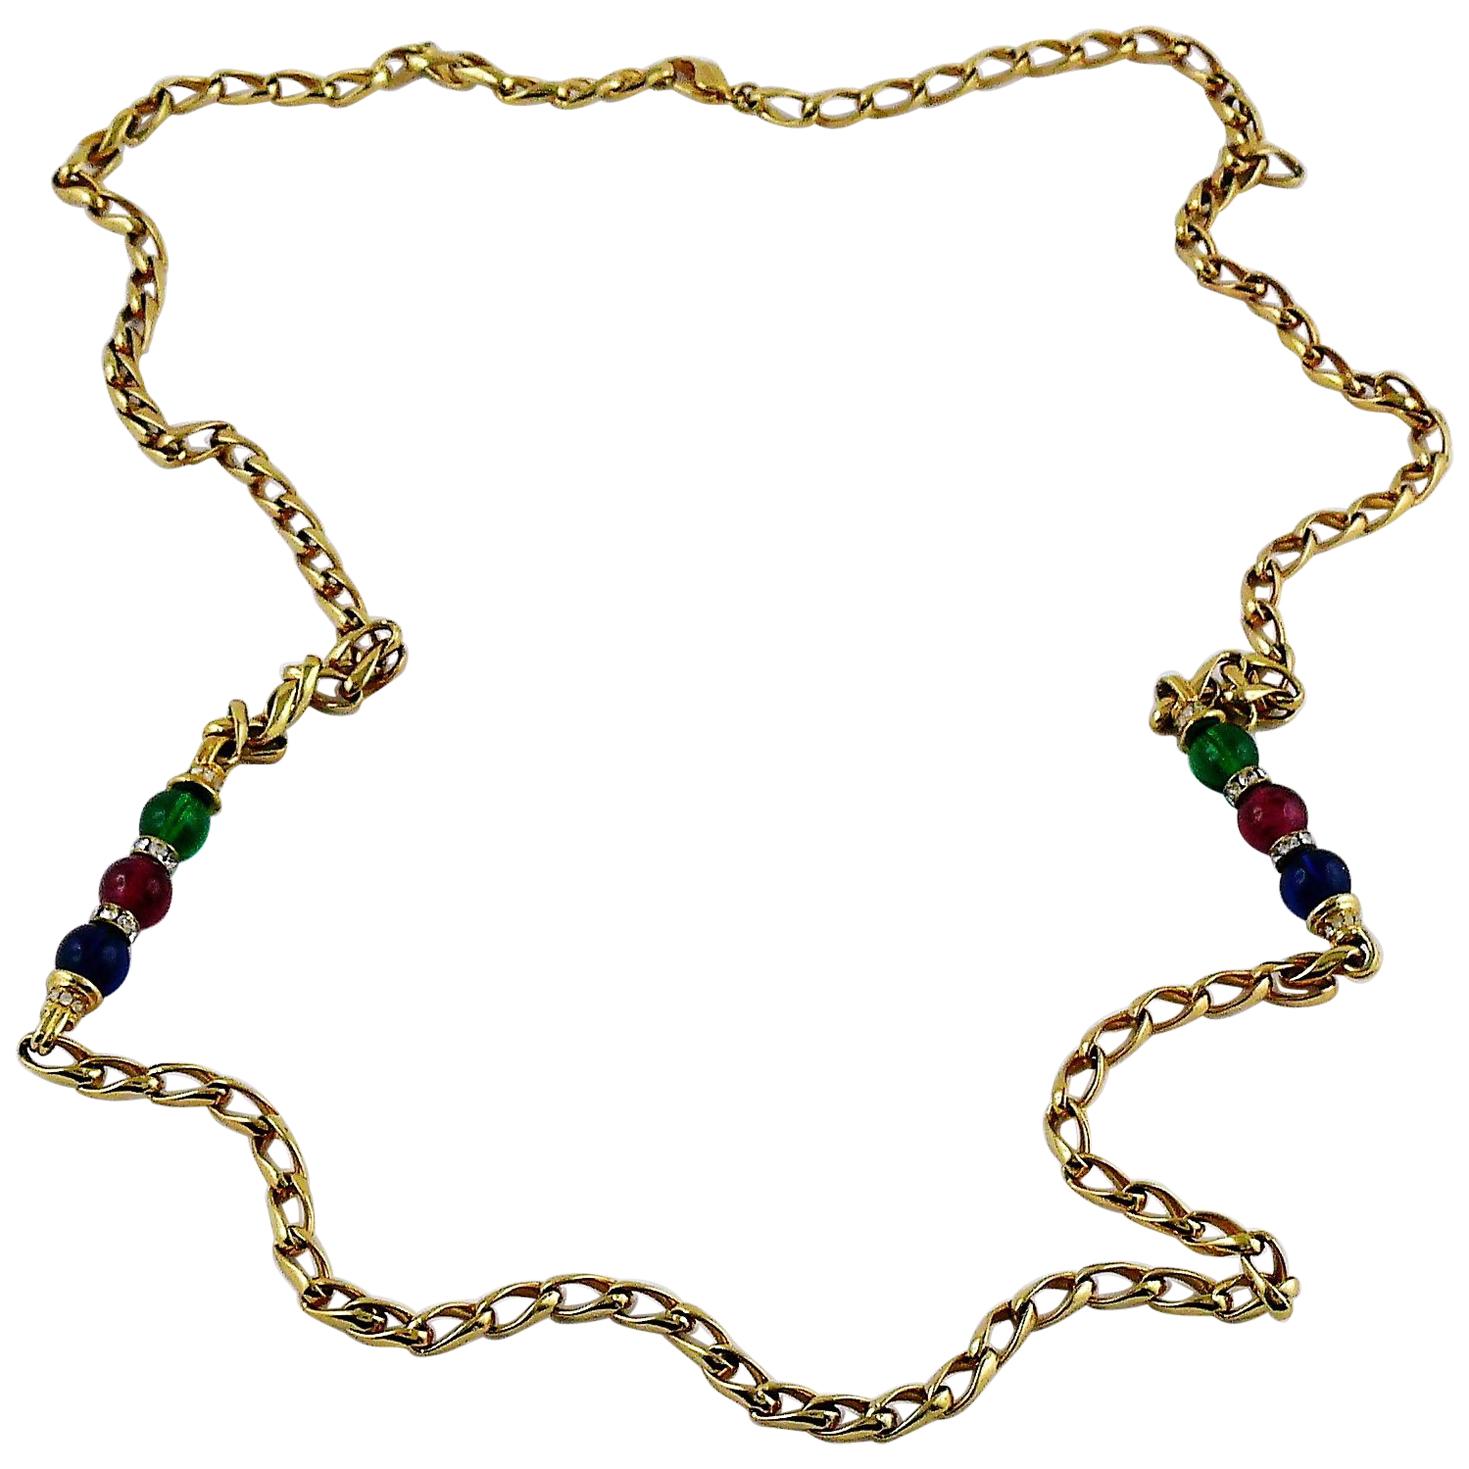 Christian Dior Vintage Jewelled Gold Tone Chain Sautoir Necklace For Sale